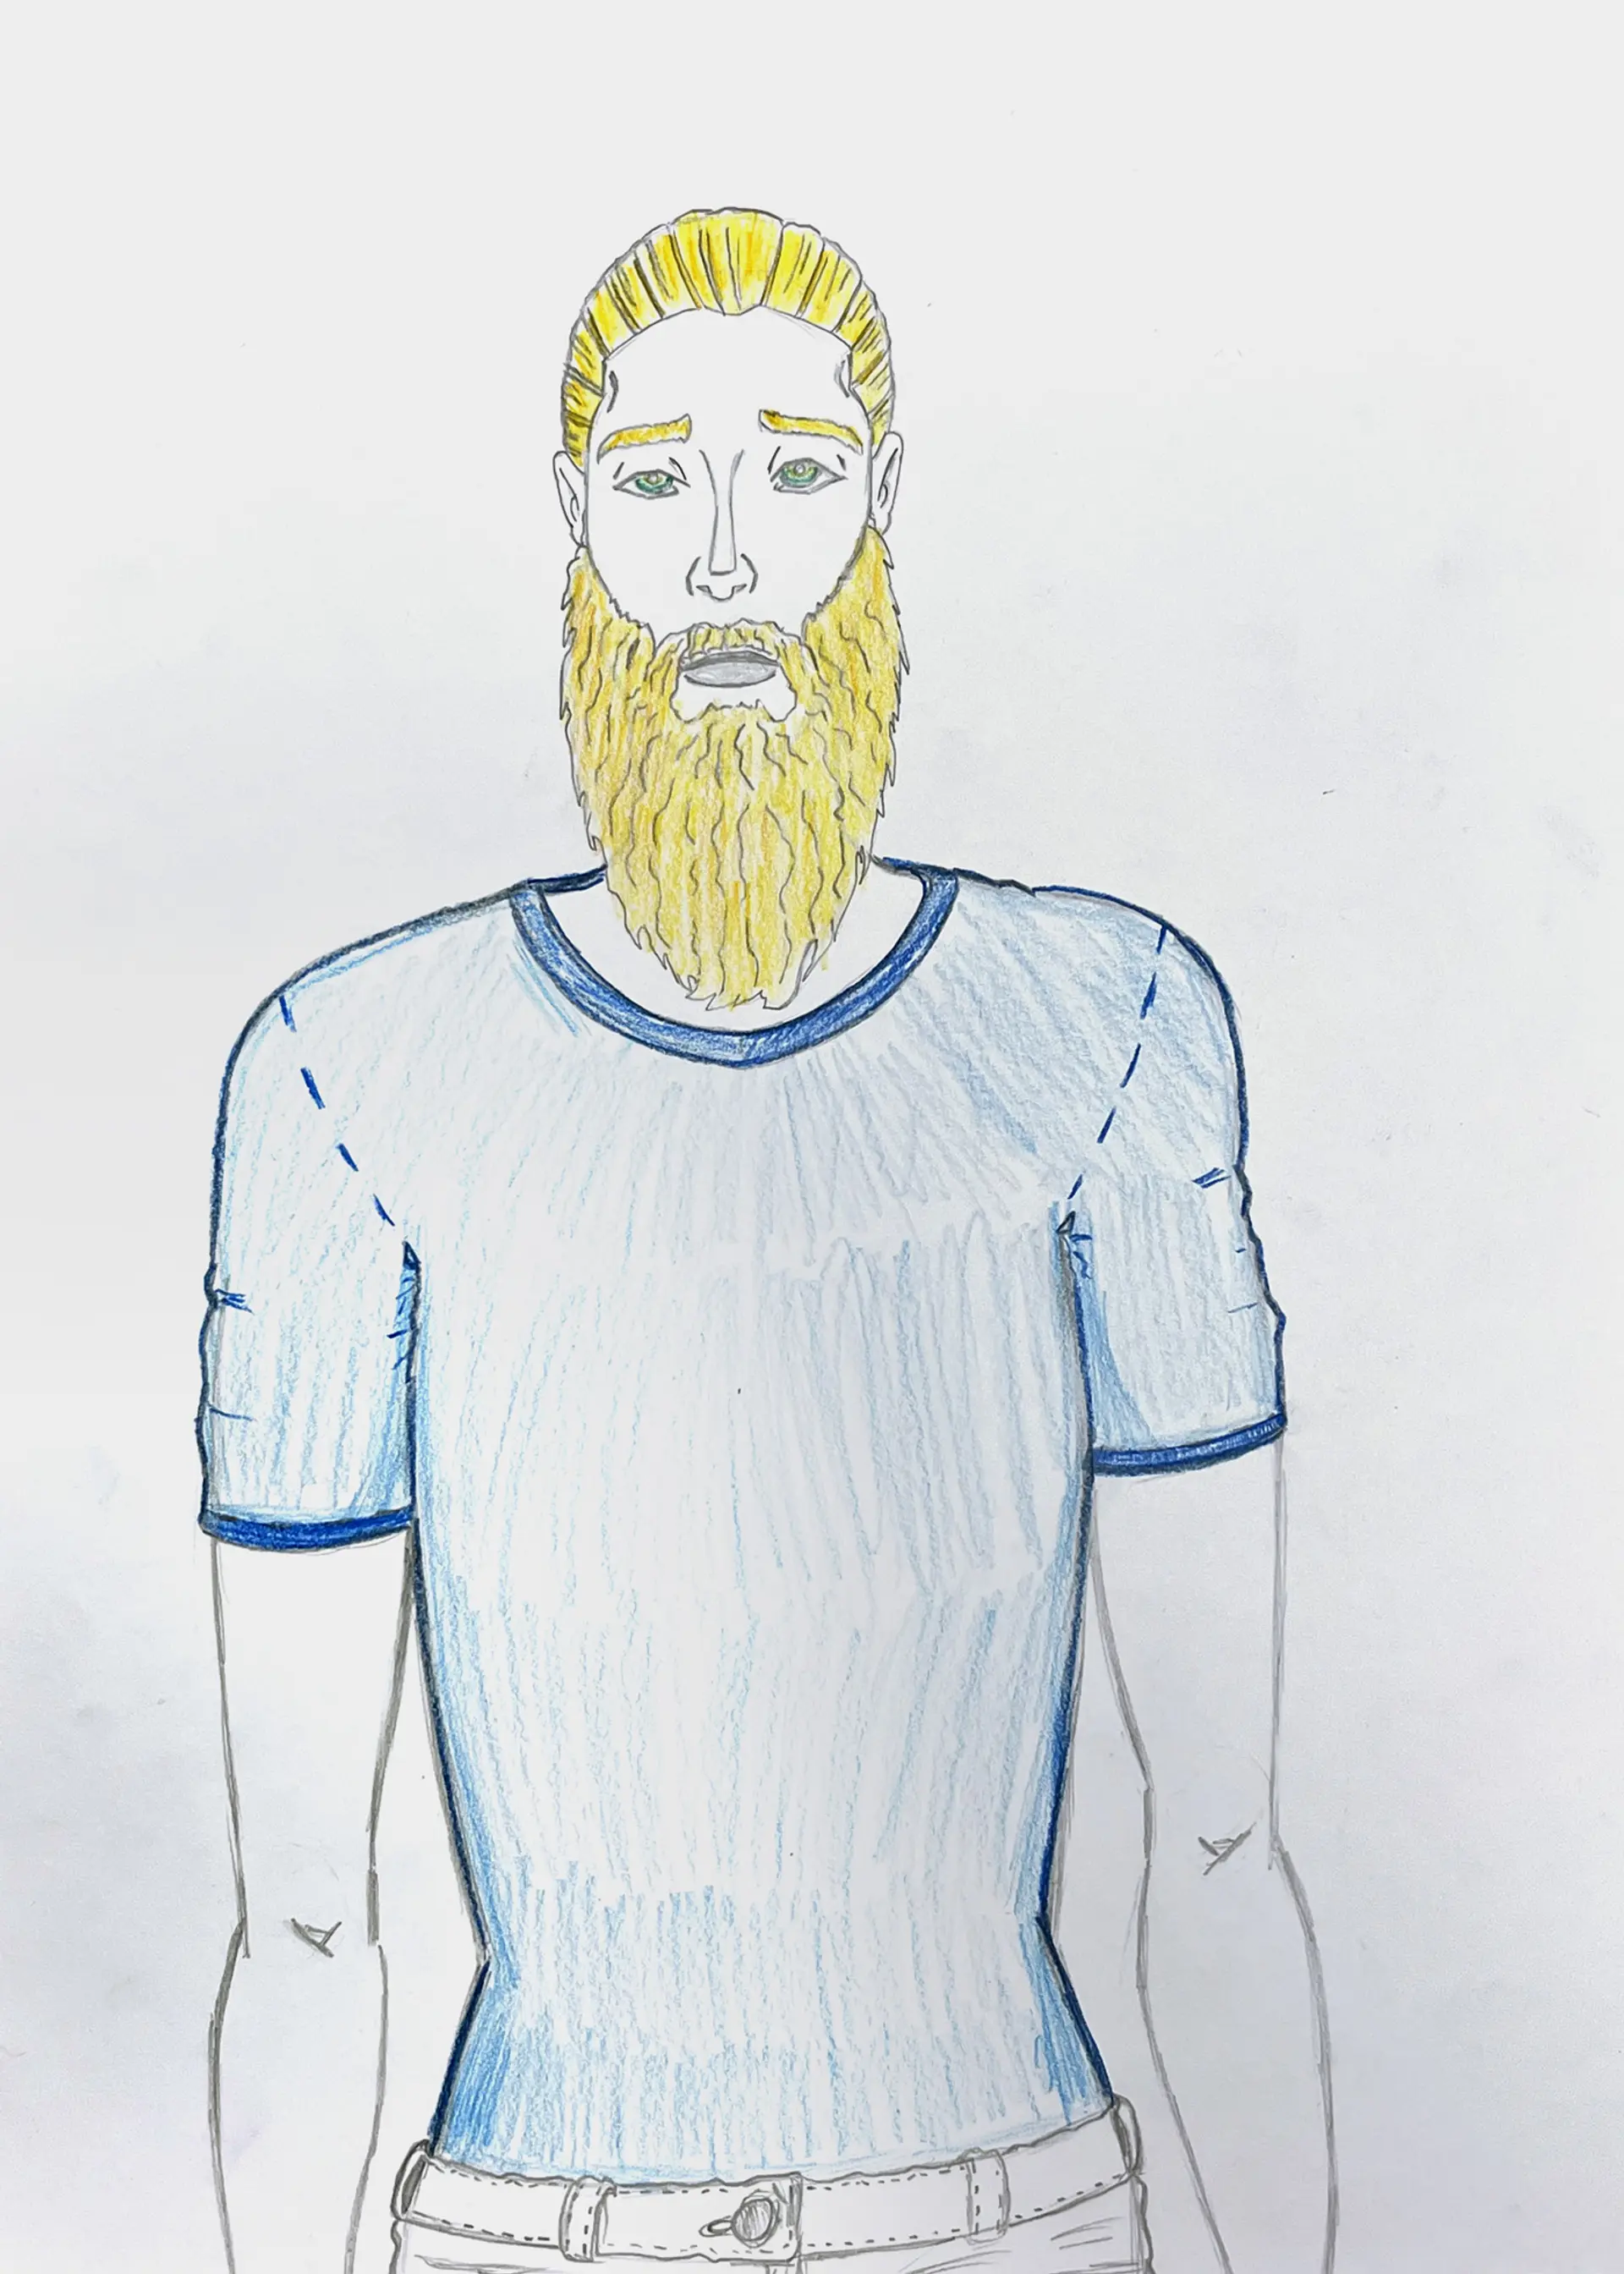 A pencil drawing of Alexander’s brother, Richard, a blonde person with a big blonde beard and green eyes. They are wearing a blue short sleeved t-shirt and the artist has detailed the stitching on their clothes.